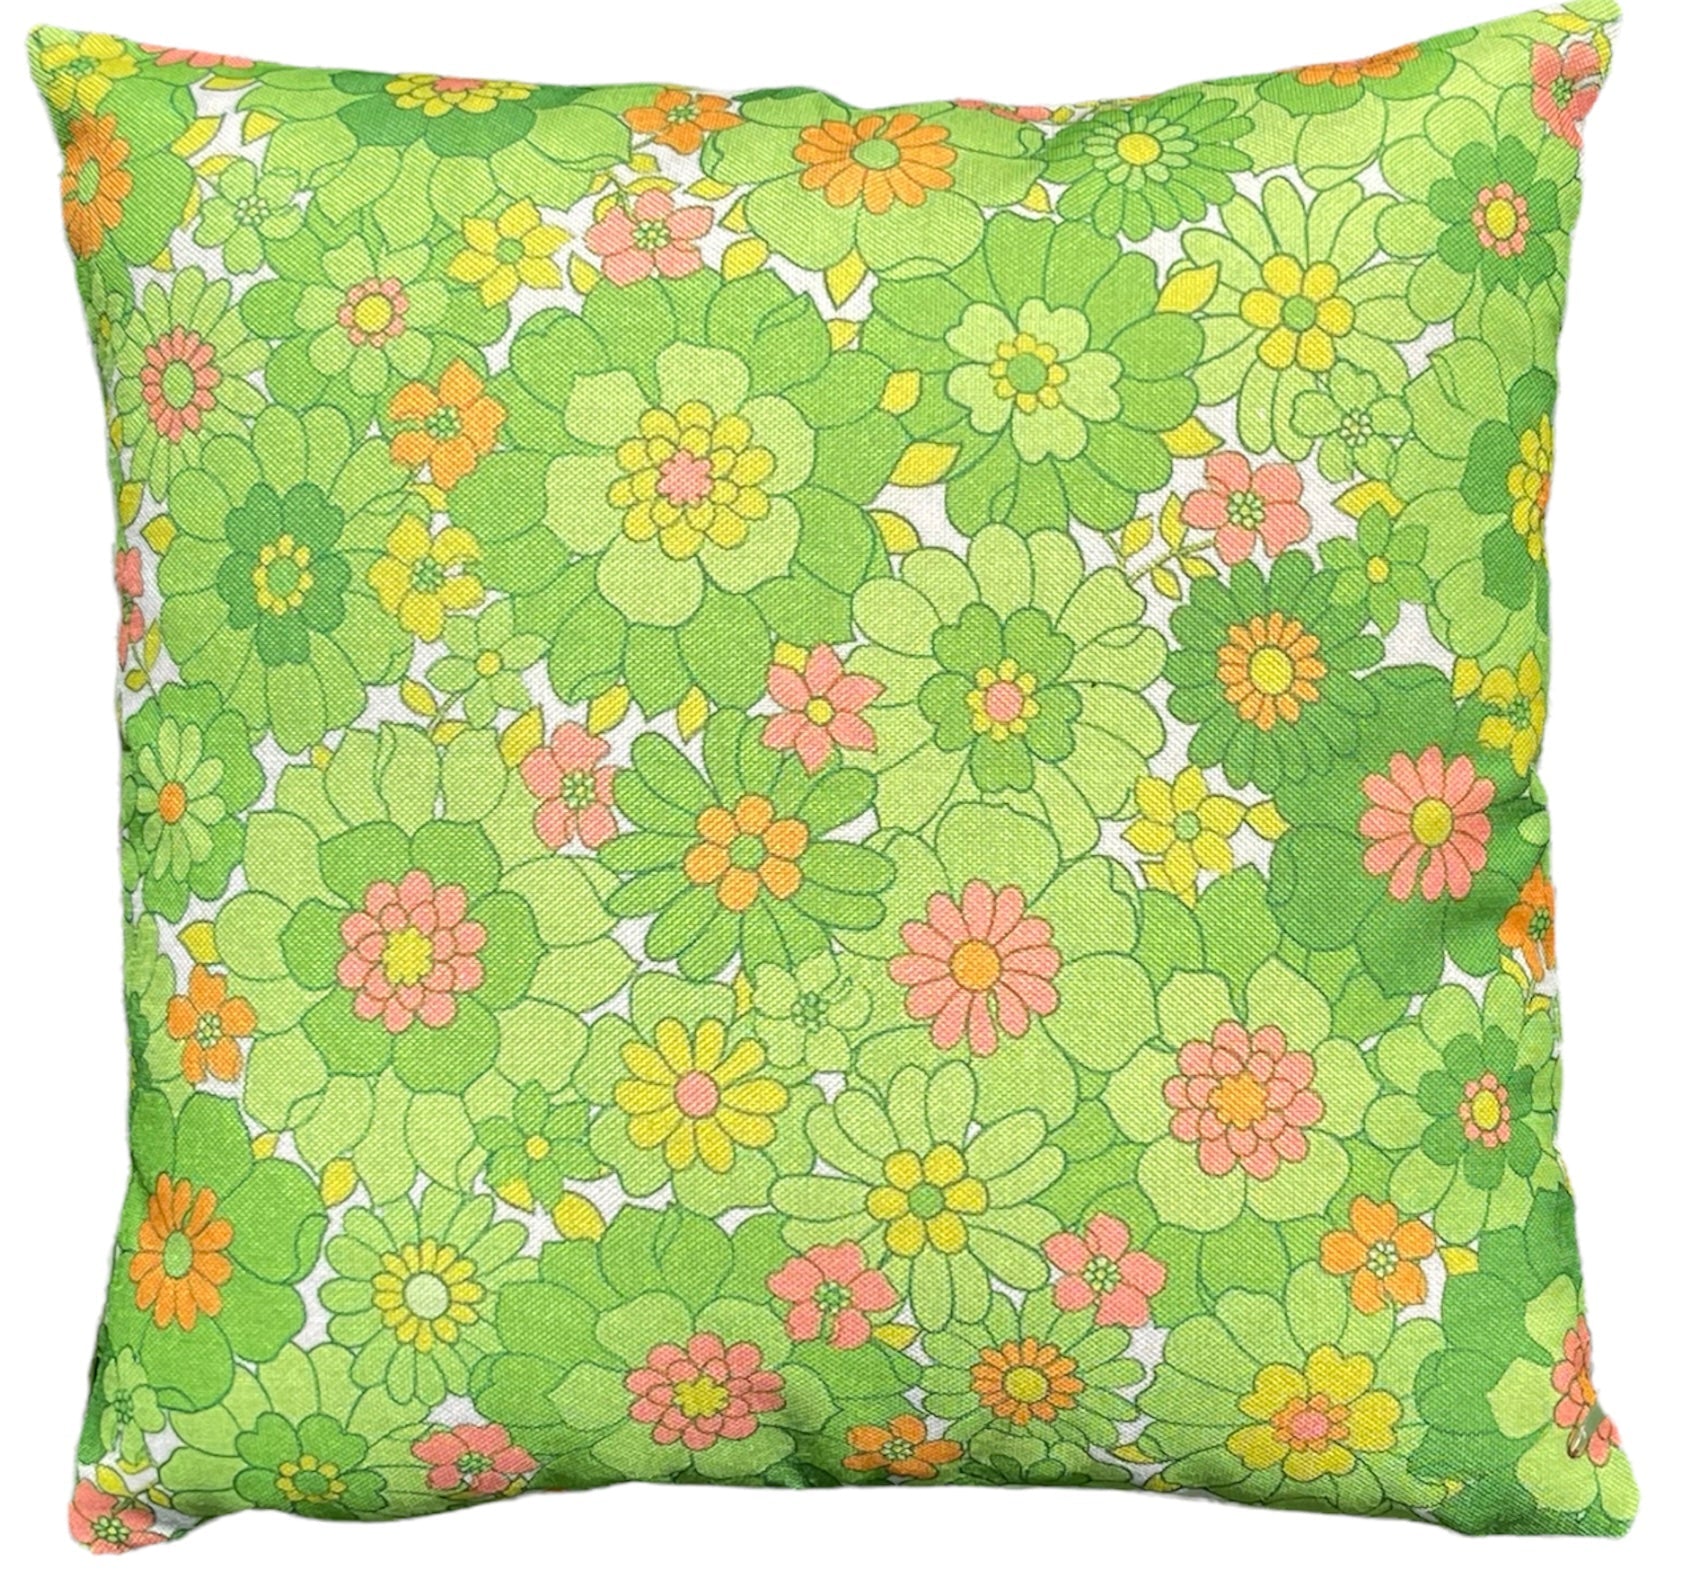 Groovy Green and Pink Flower Power 18 by 18 inch Pillow Case Cover - Relic828